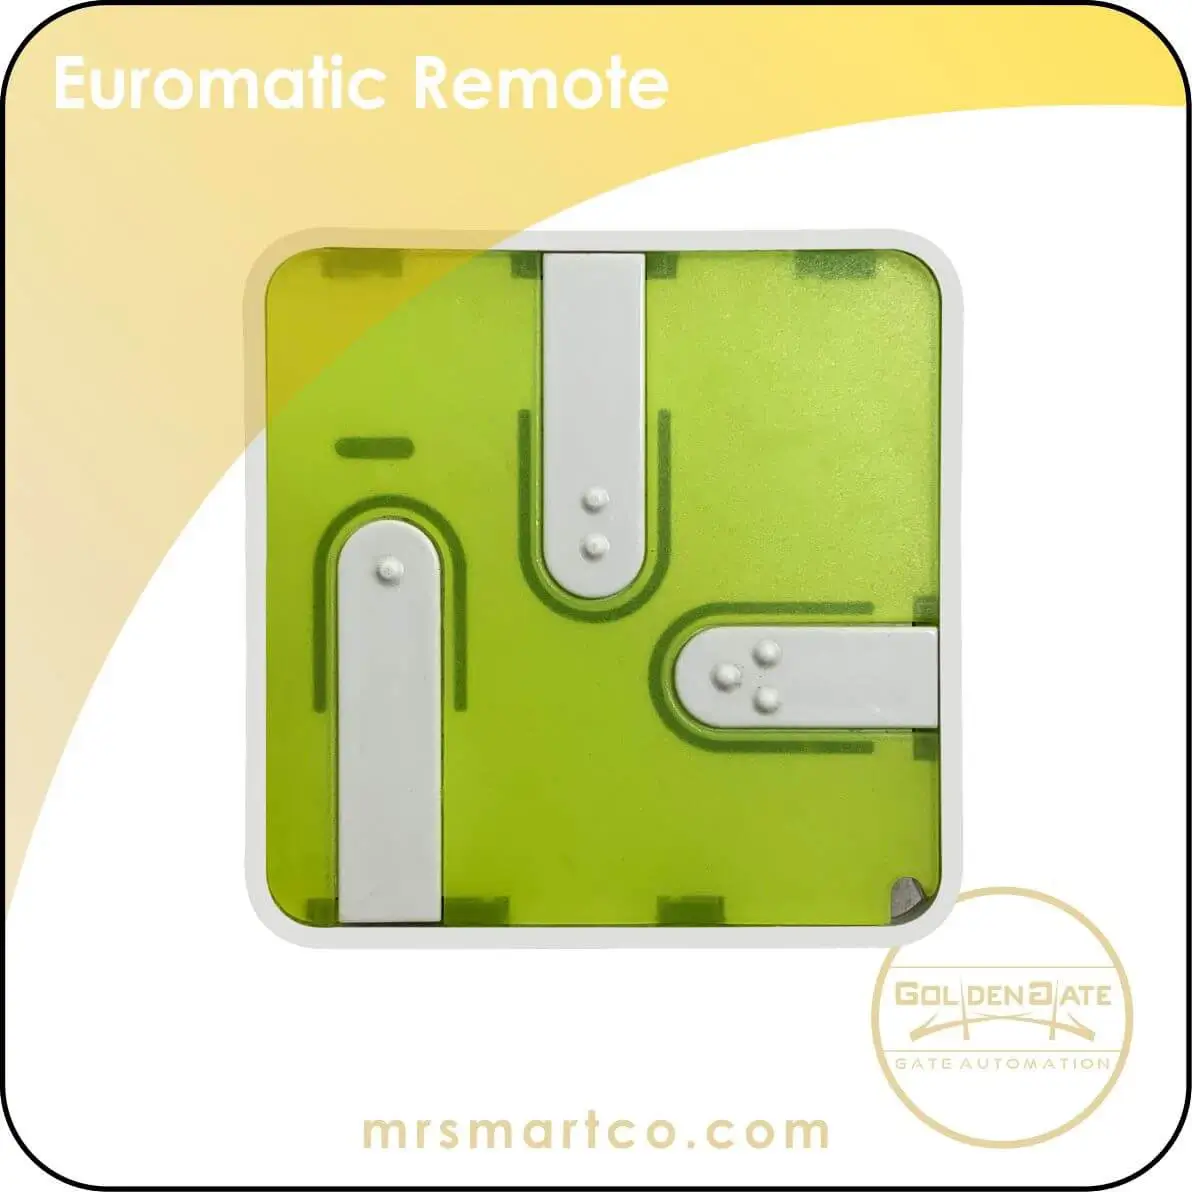 euromatic swing gate remote